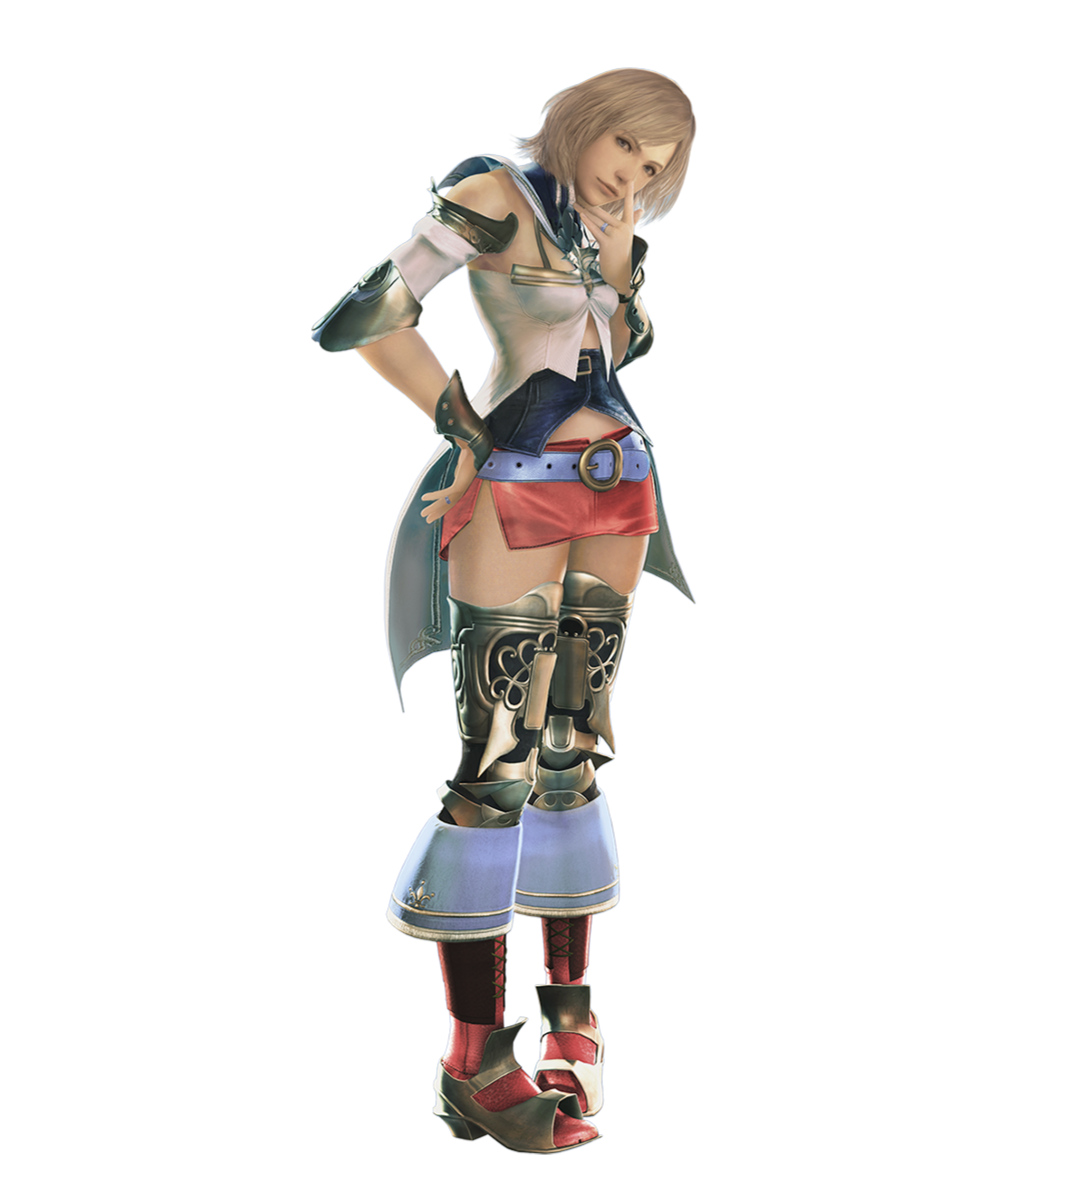 Character Final Fantasy Xii The Zodiac Age Square Enix